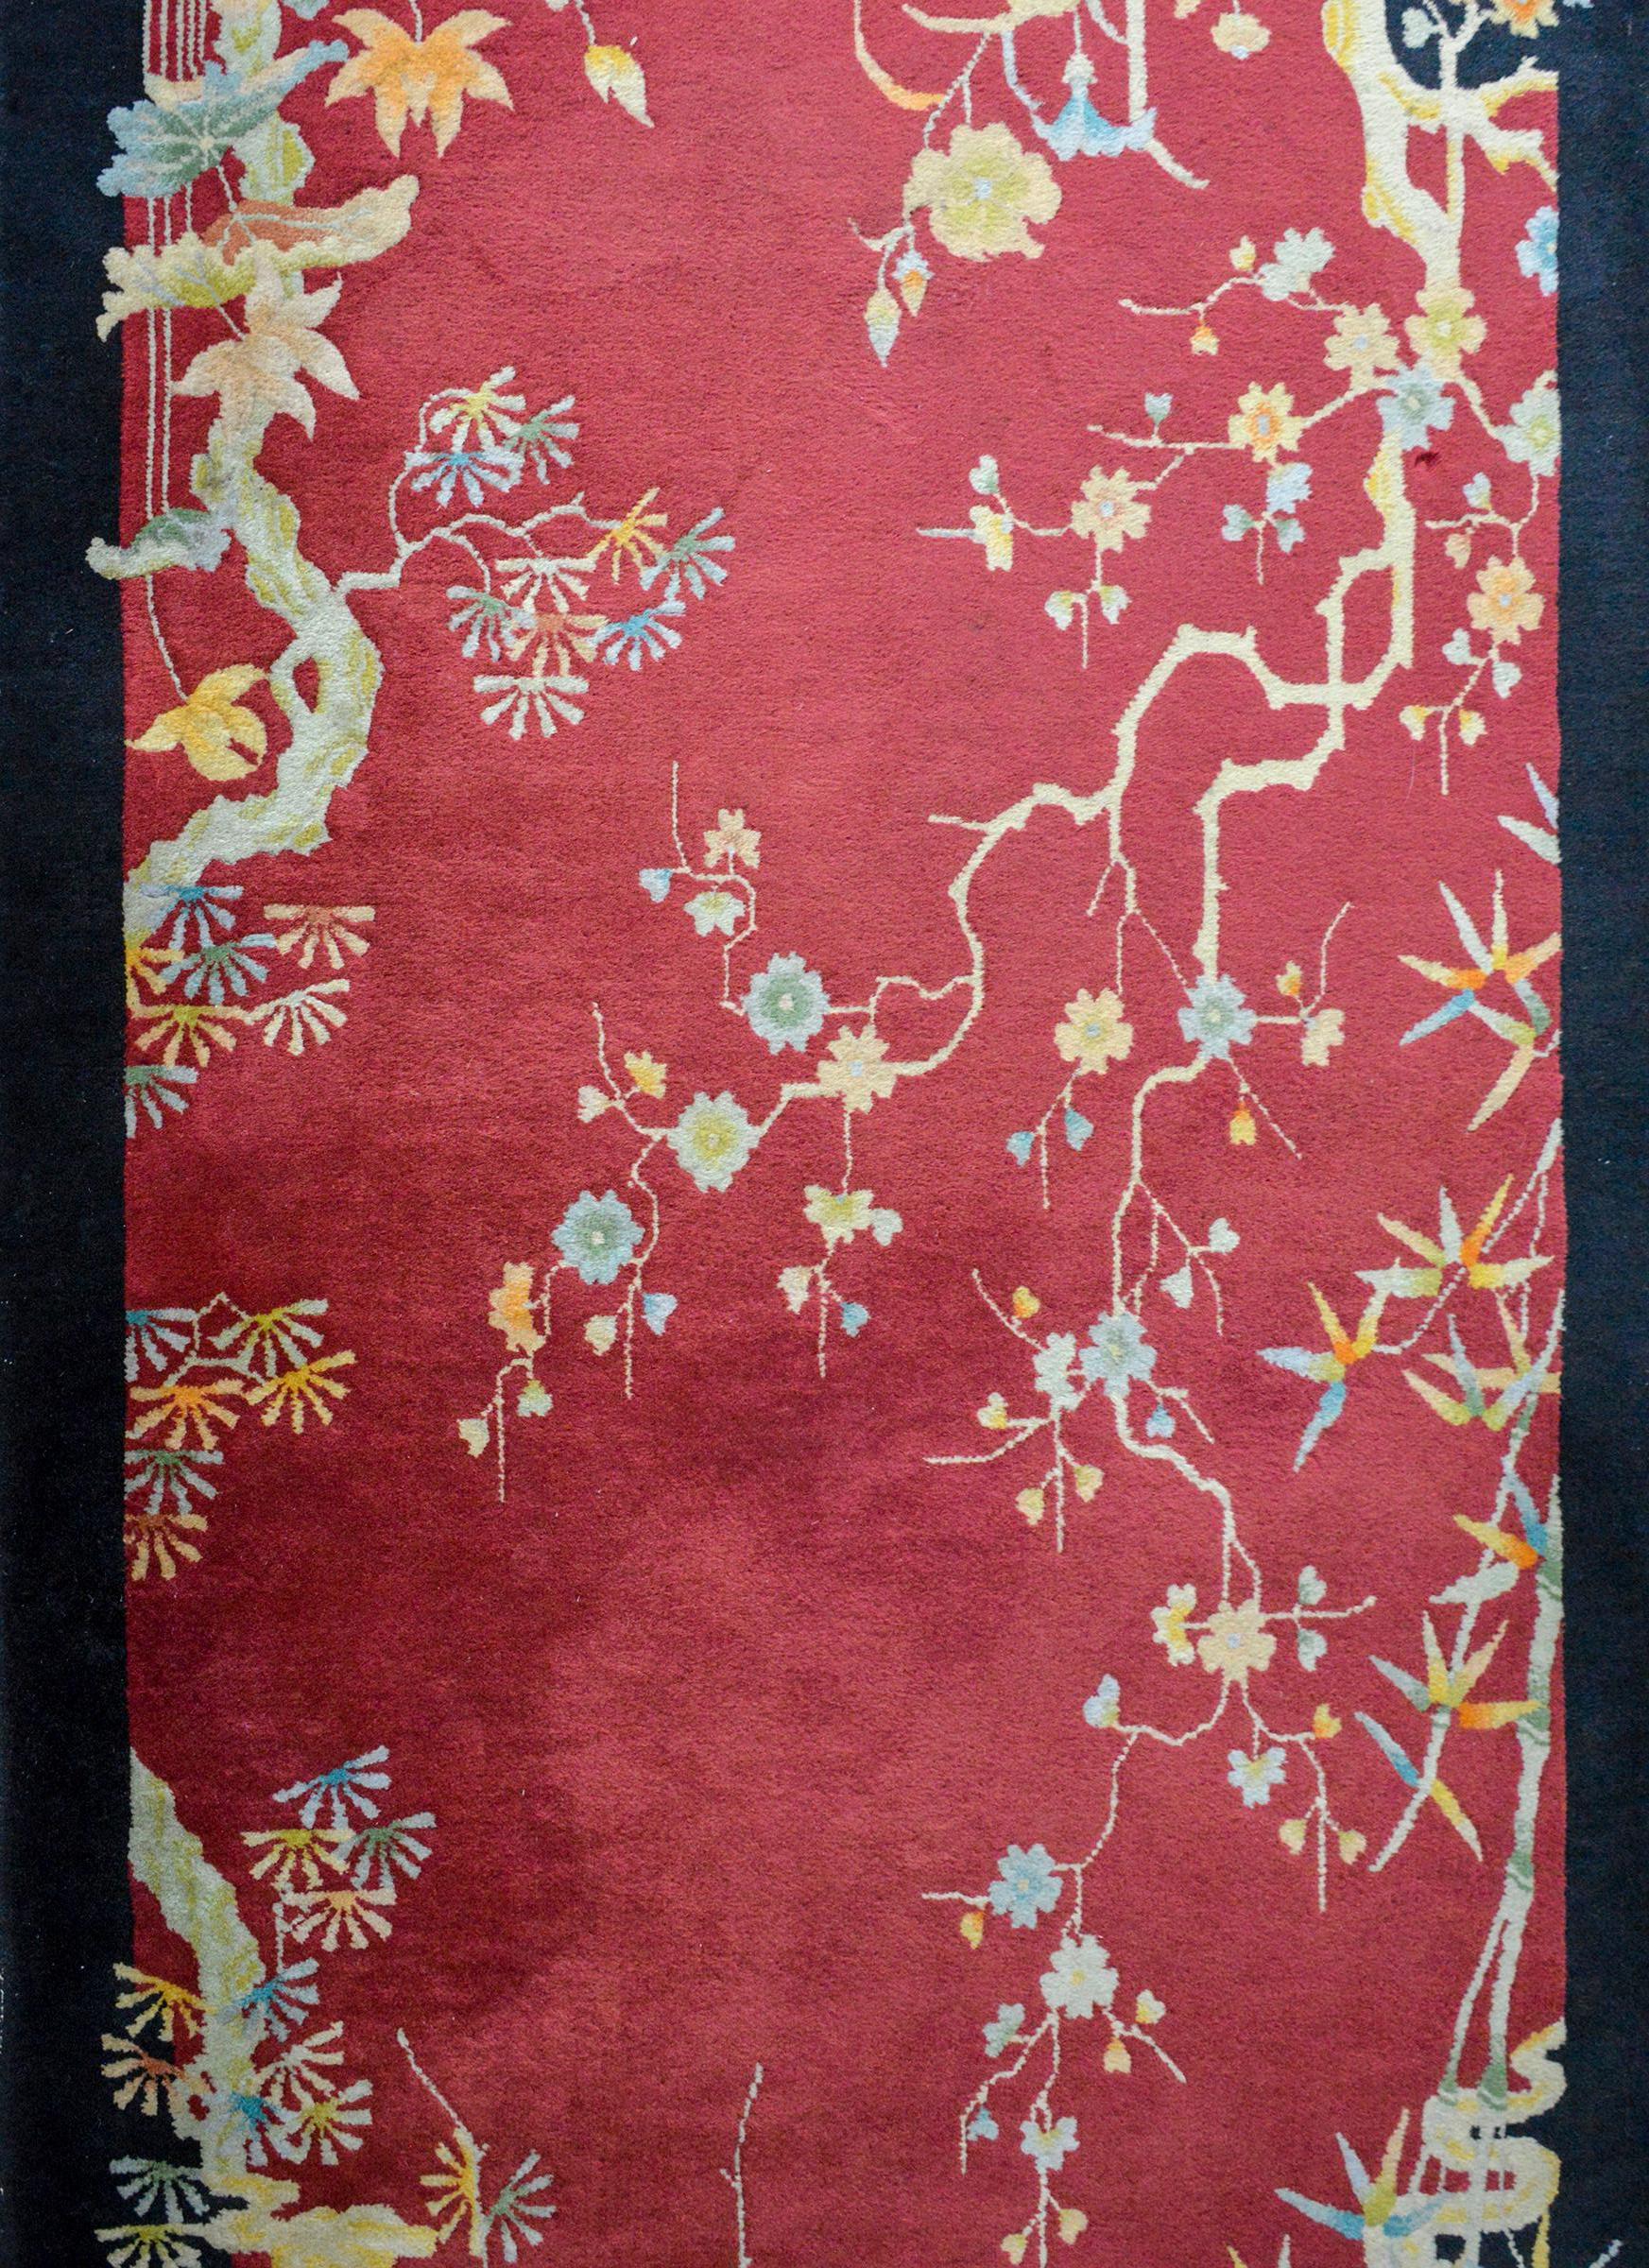 A beautiful early 20th century Chinese Art Deco rug with a deep cranberry colored background surrounded by a black border, and myriad auspicious flowers including bamboo, peonies, lotus, and cherry blossoms all woven in pale blues, oranges, yellows,